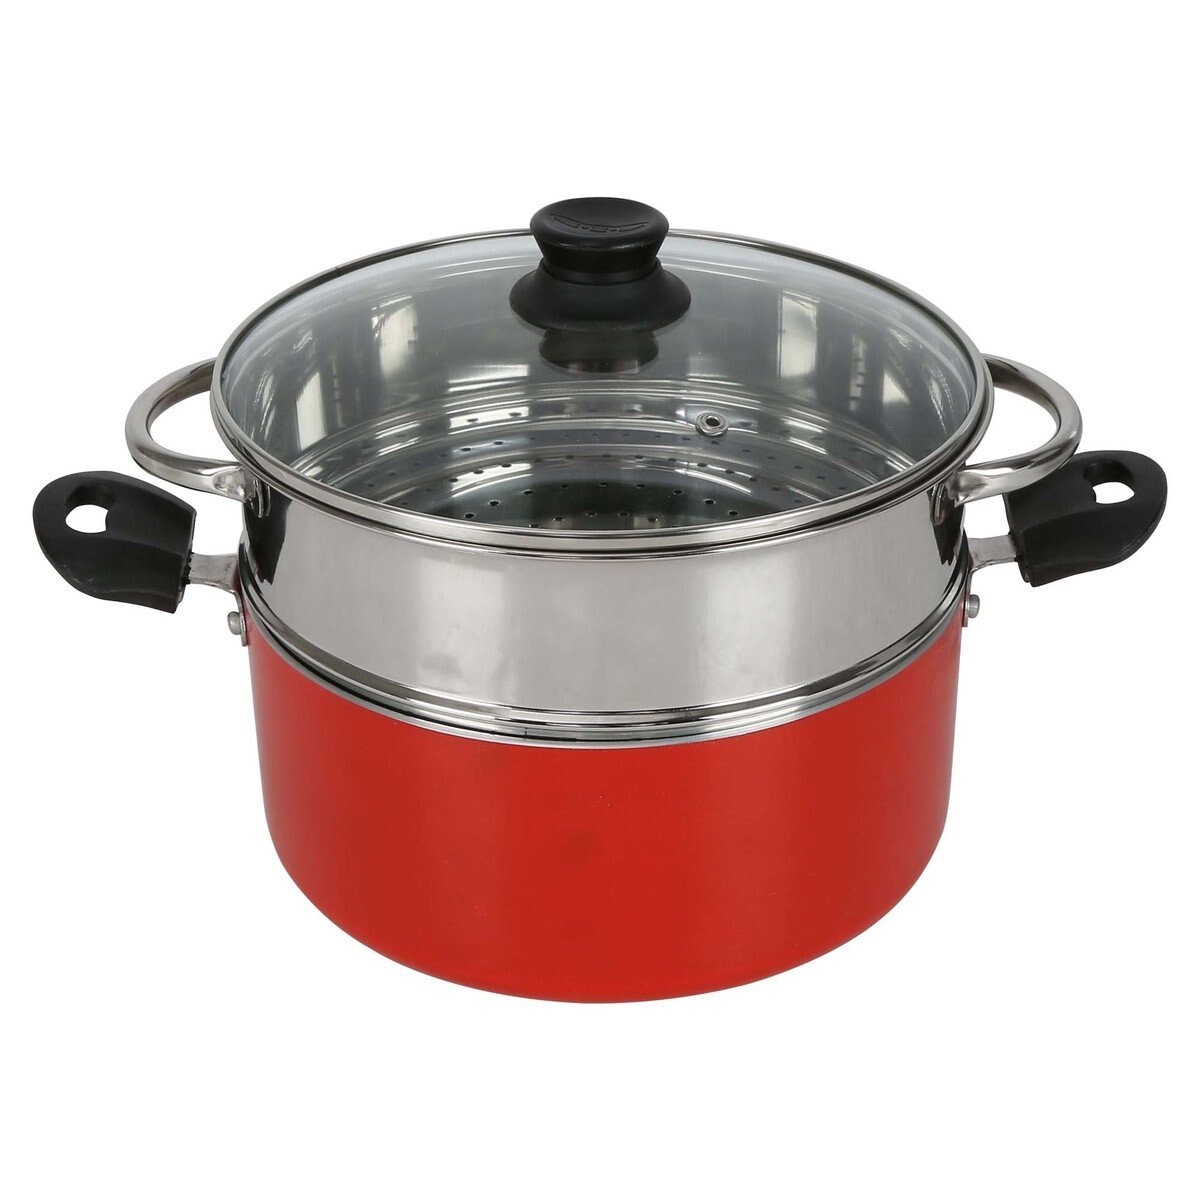 Chefline Non-Stick Casserole + Stainless Steel Steamer With Glass Lid 24cm